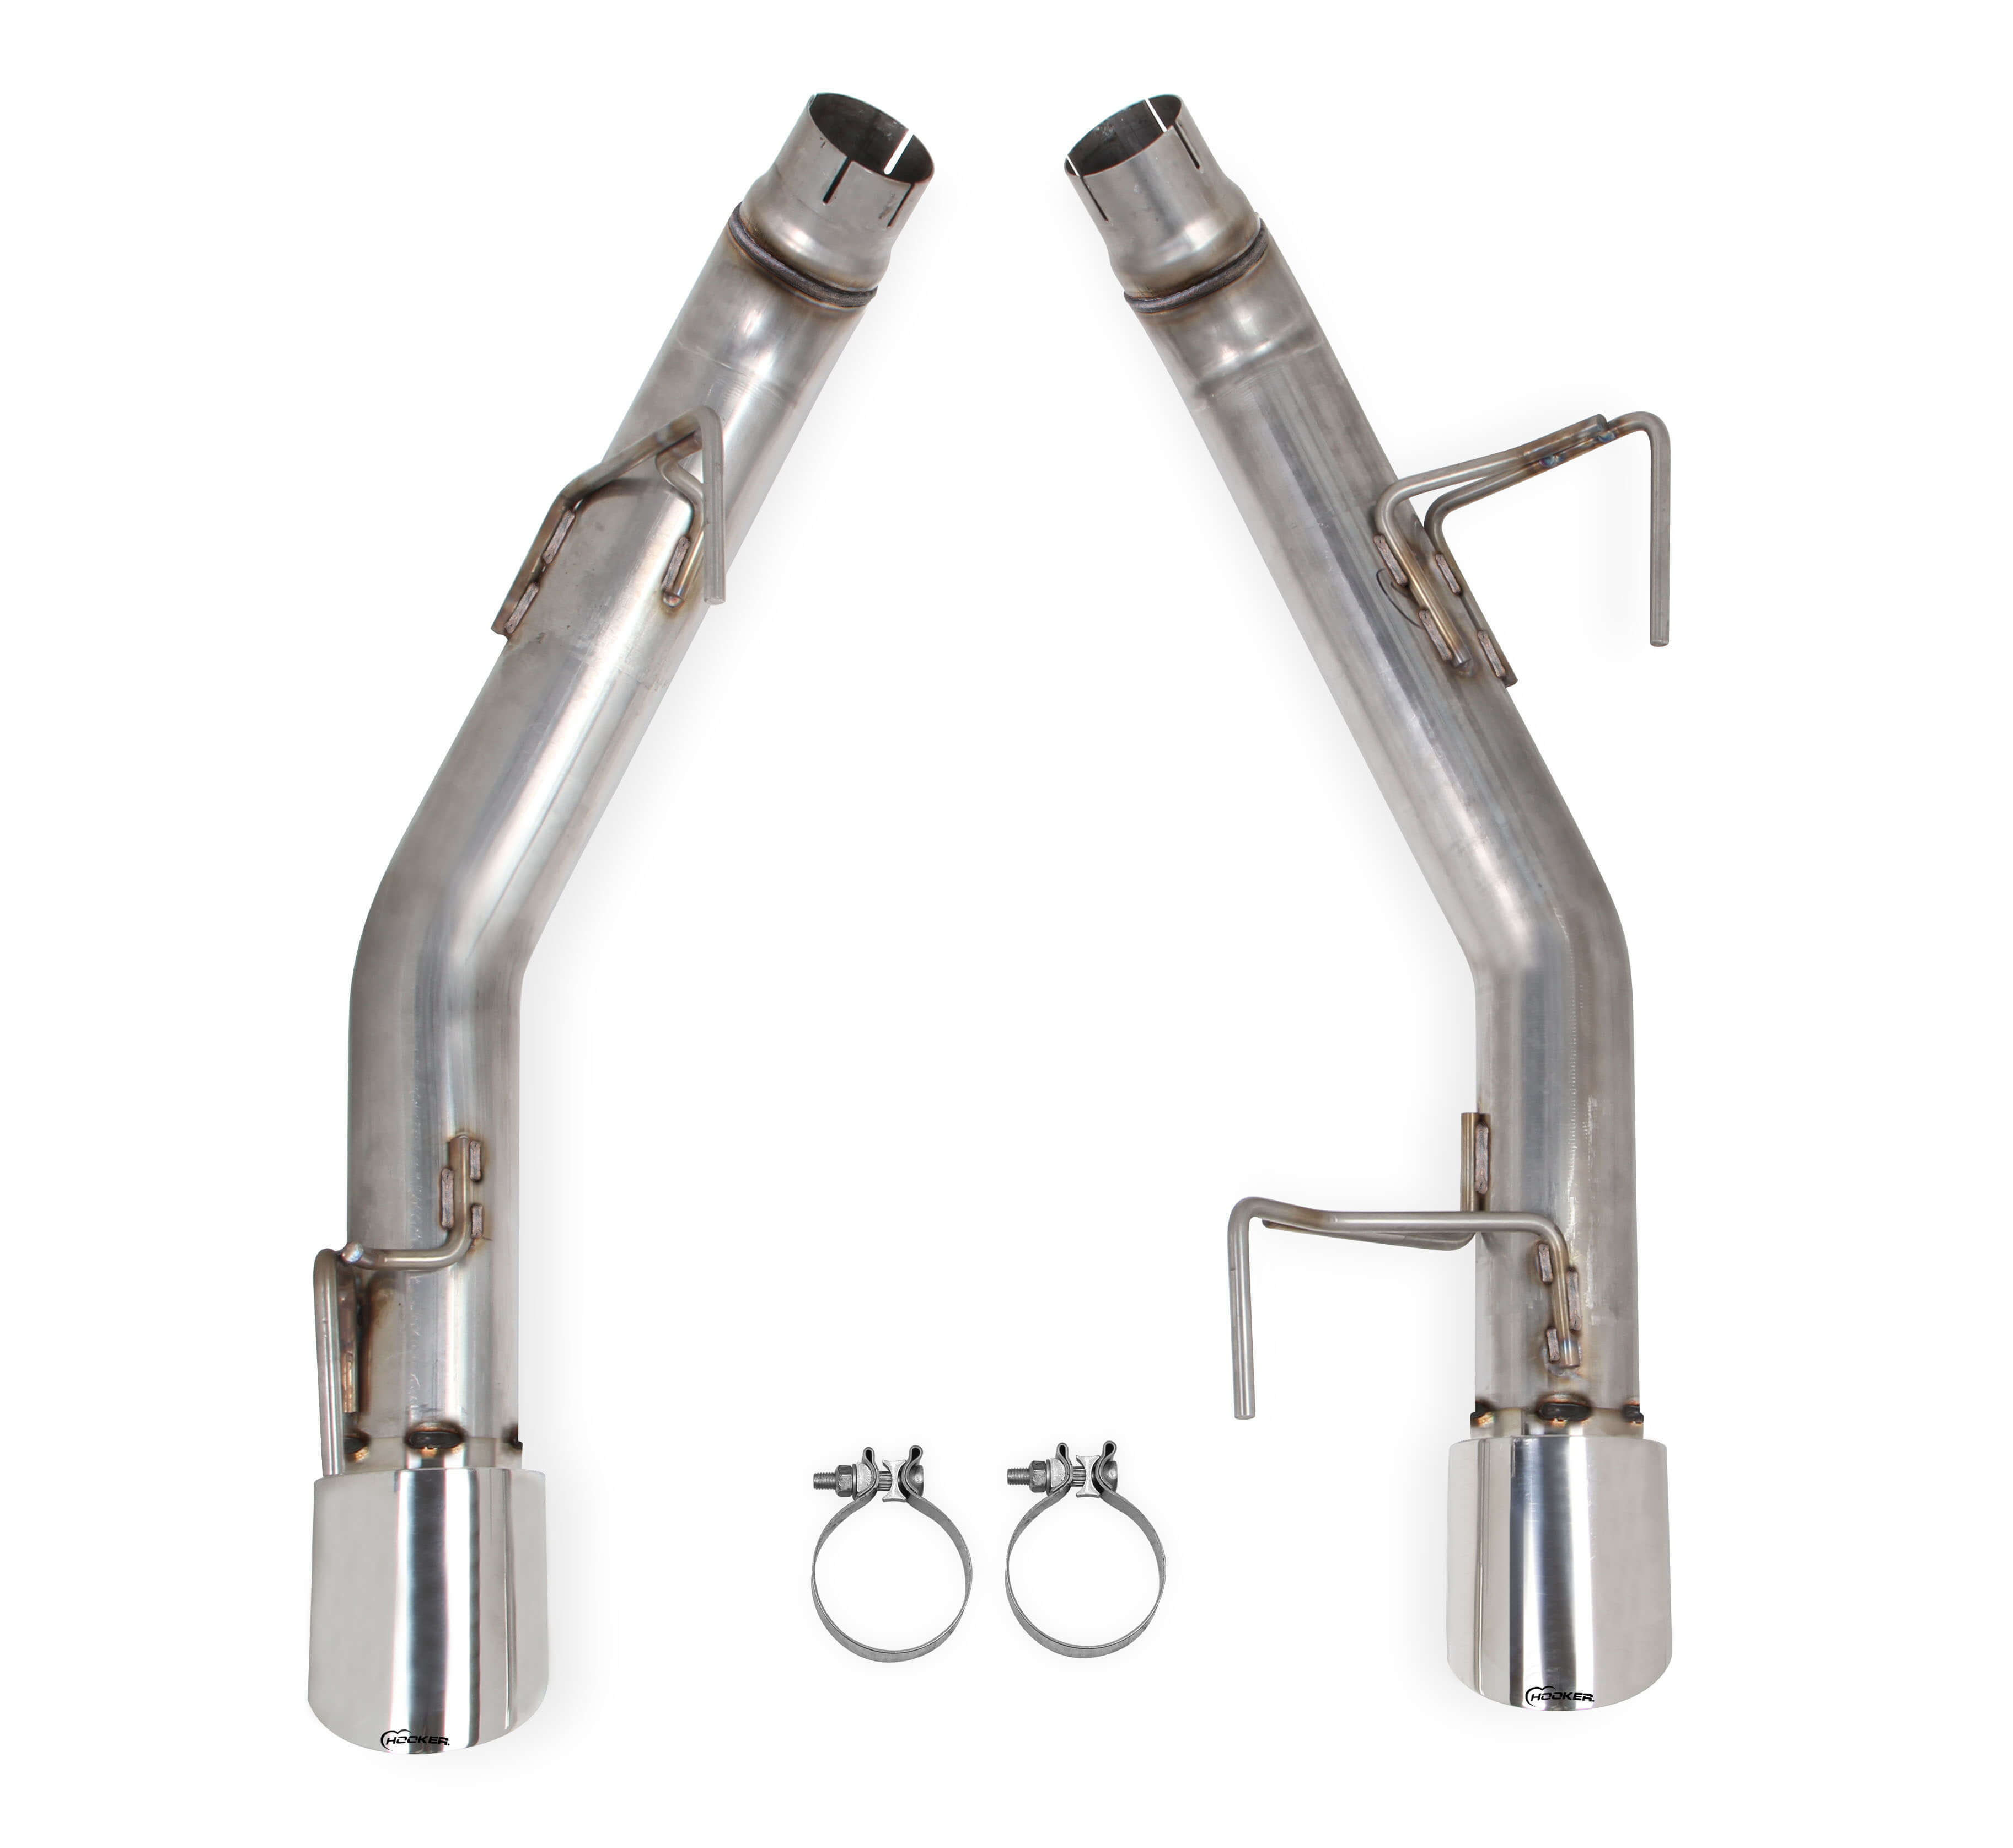 Hooker Exhaust System, Blackheart, Axle Back, 3" Tailpipe, 4" Tips, Stainless, Polished, V8, GT, Ford Mustang 2005-09